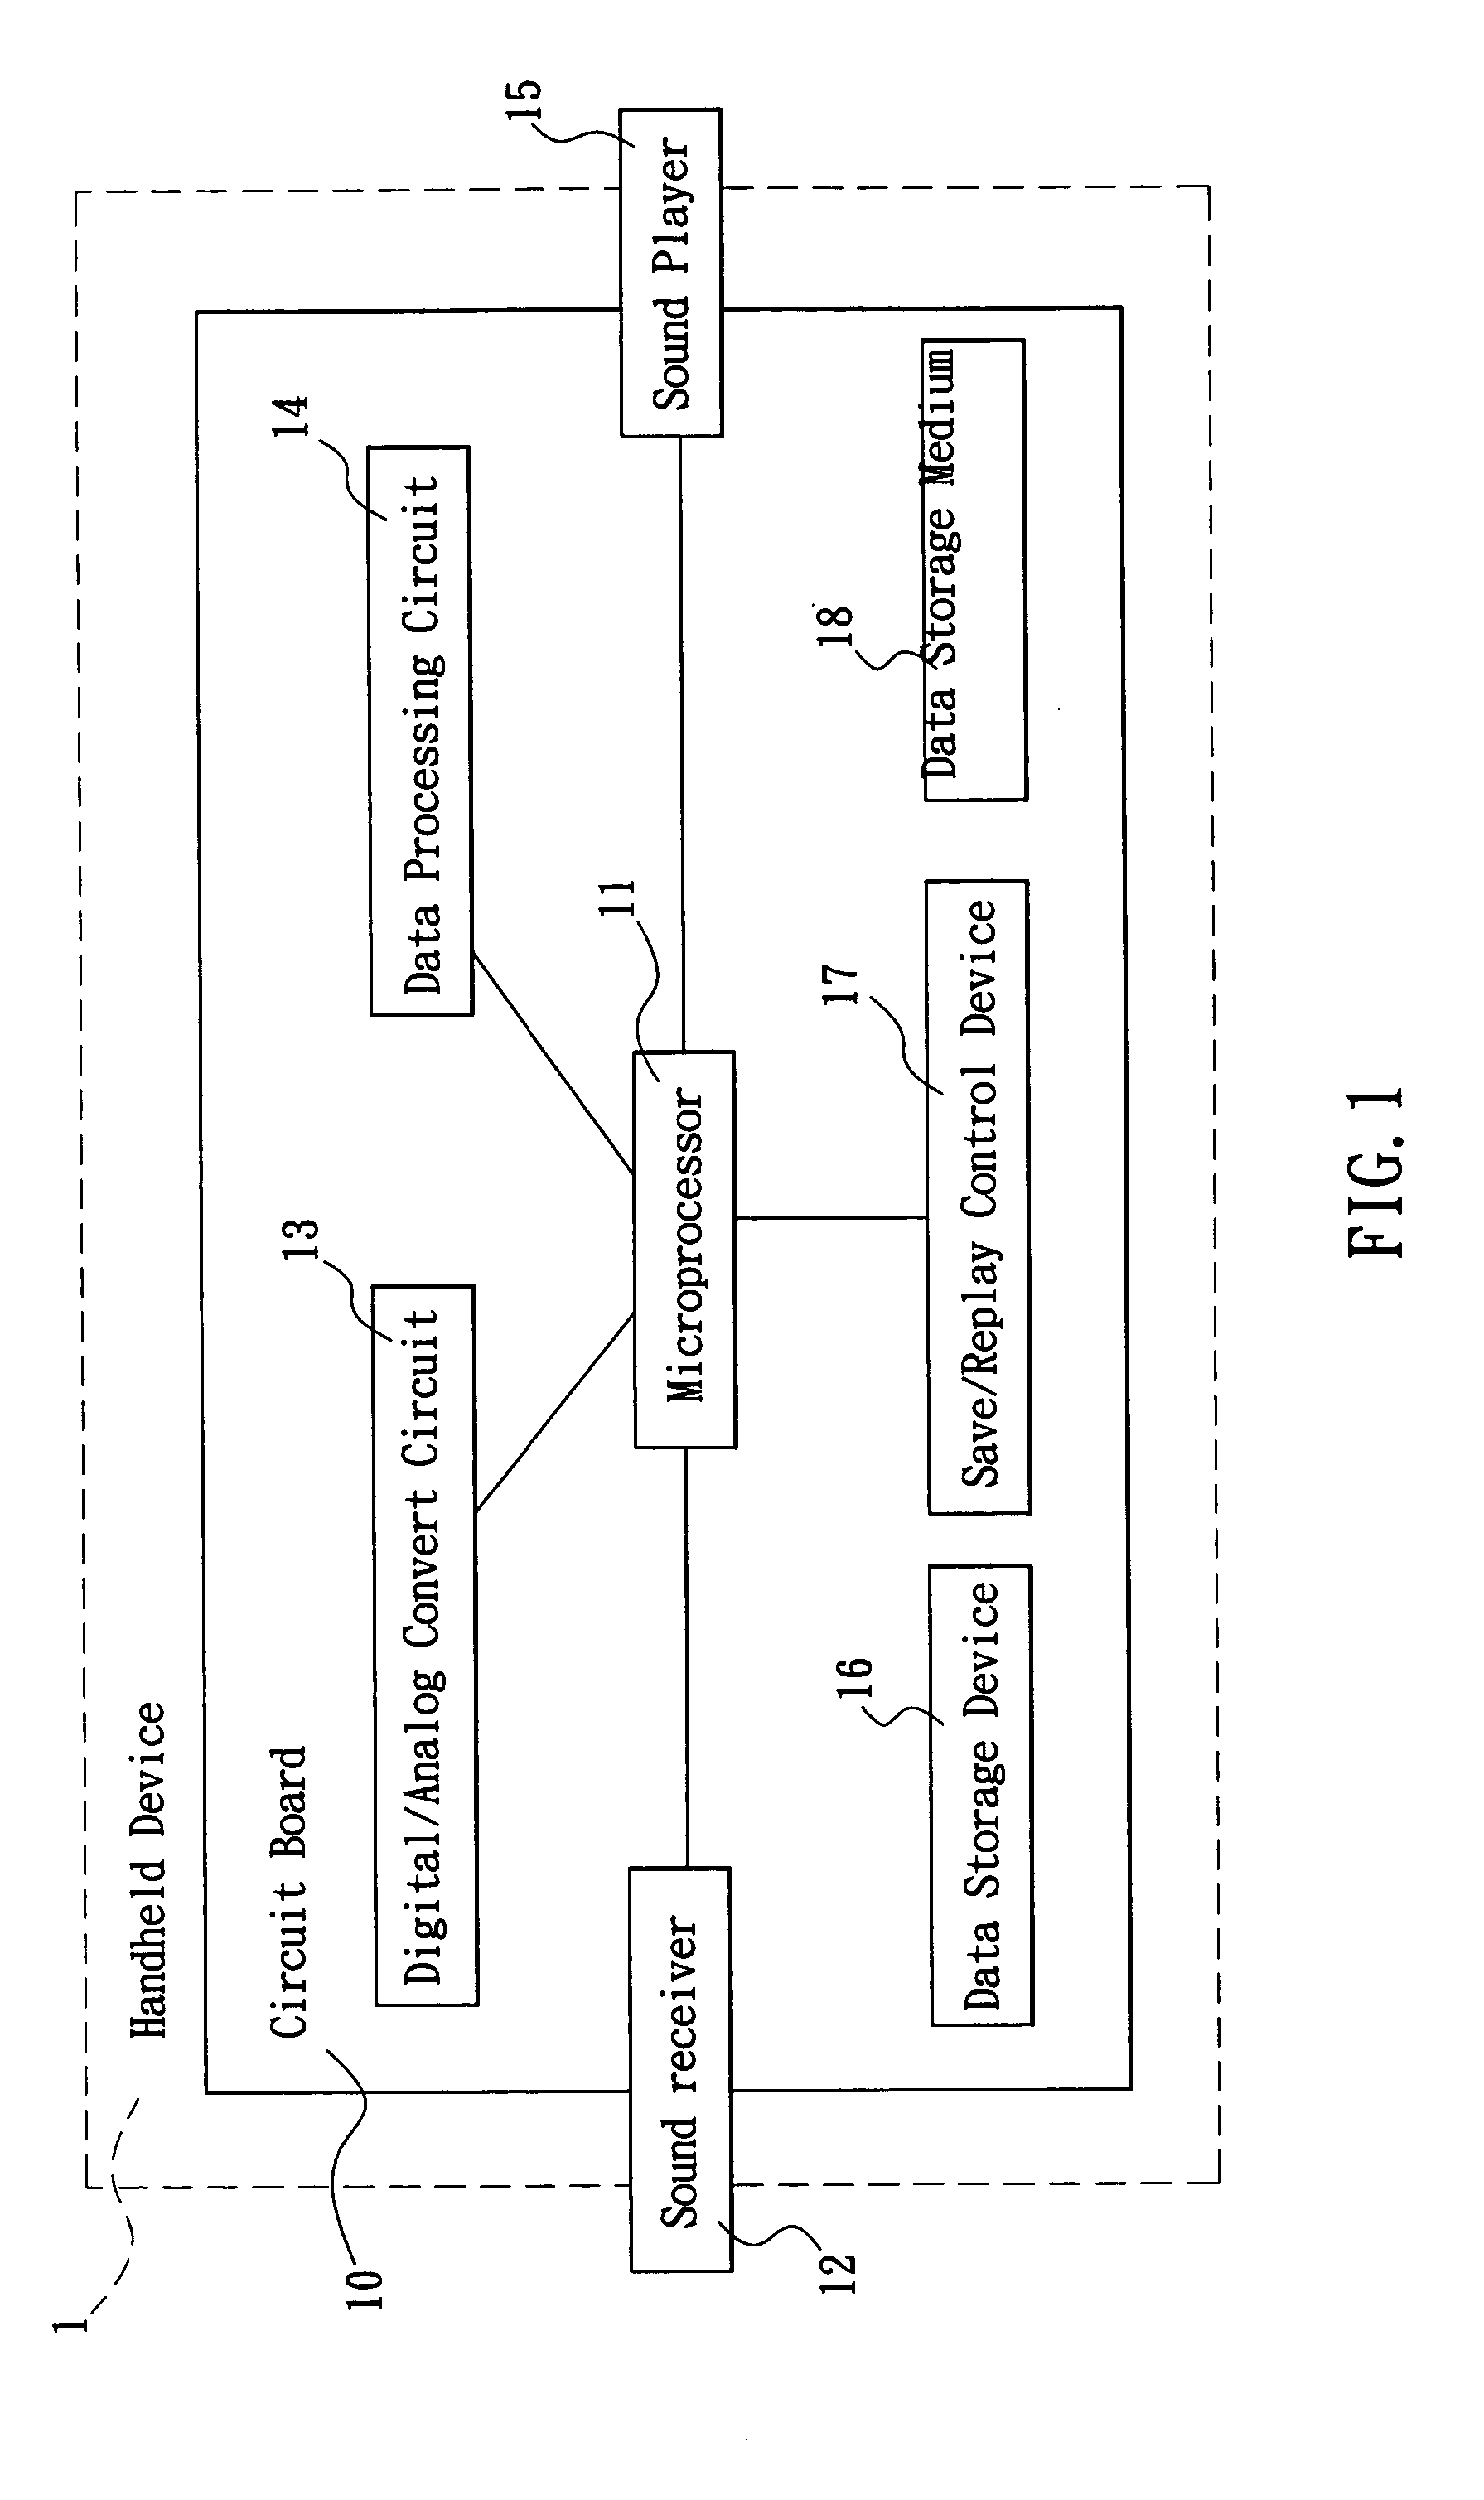 Handheld device with hearing aid function